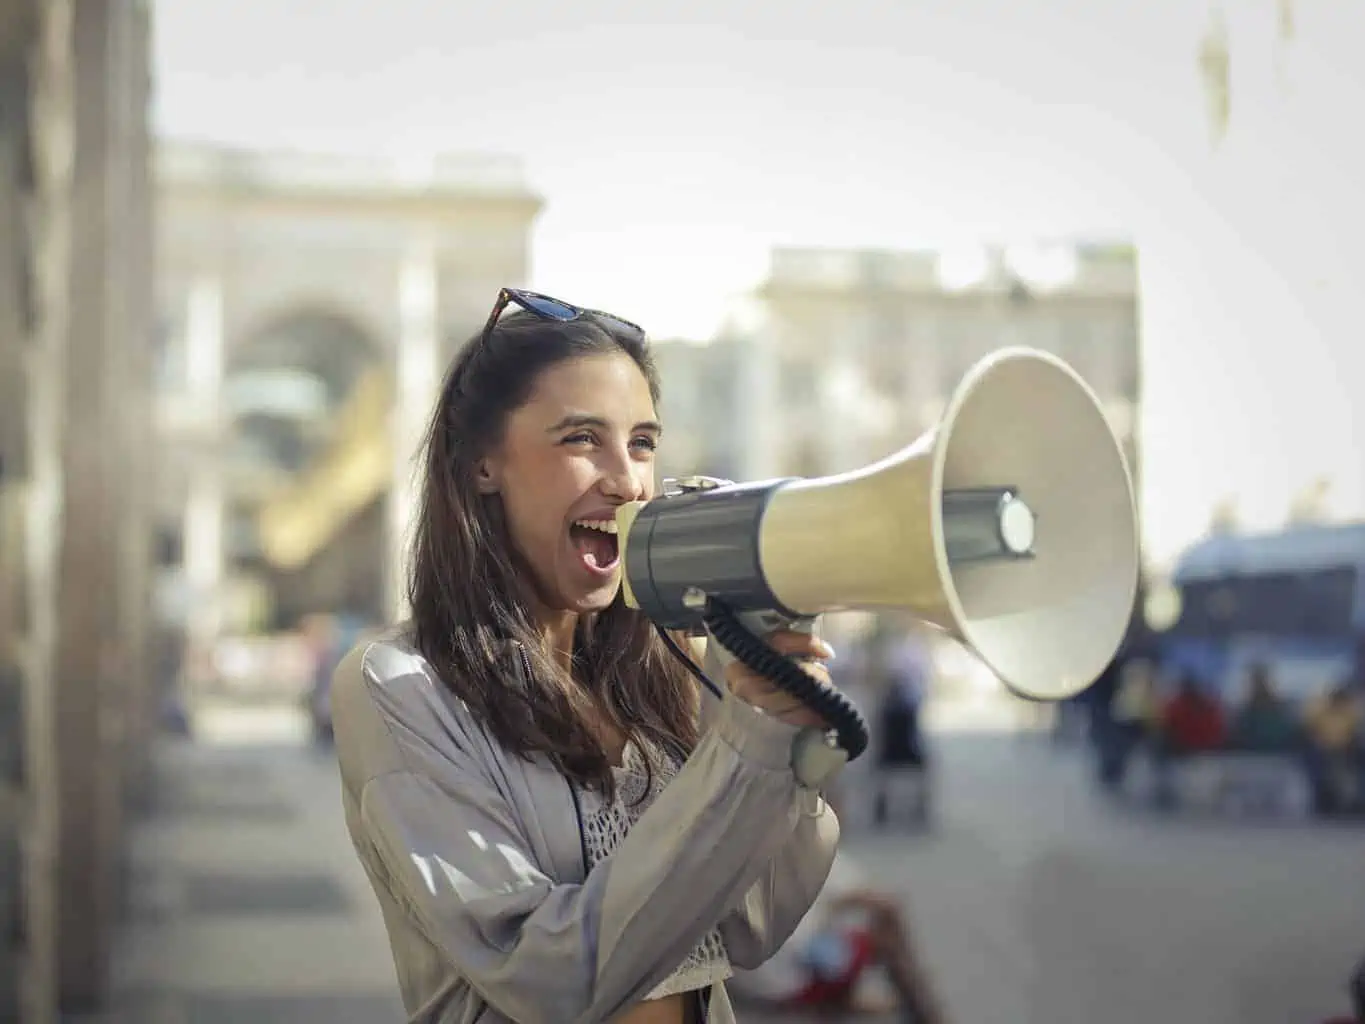 cheerful young woman screaming into megaphone
why is acoustics important?